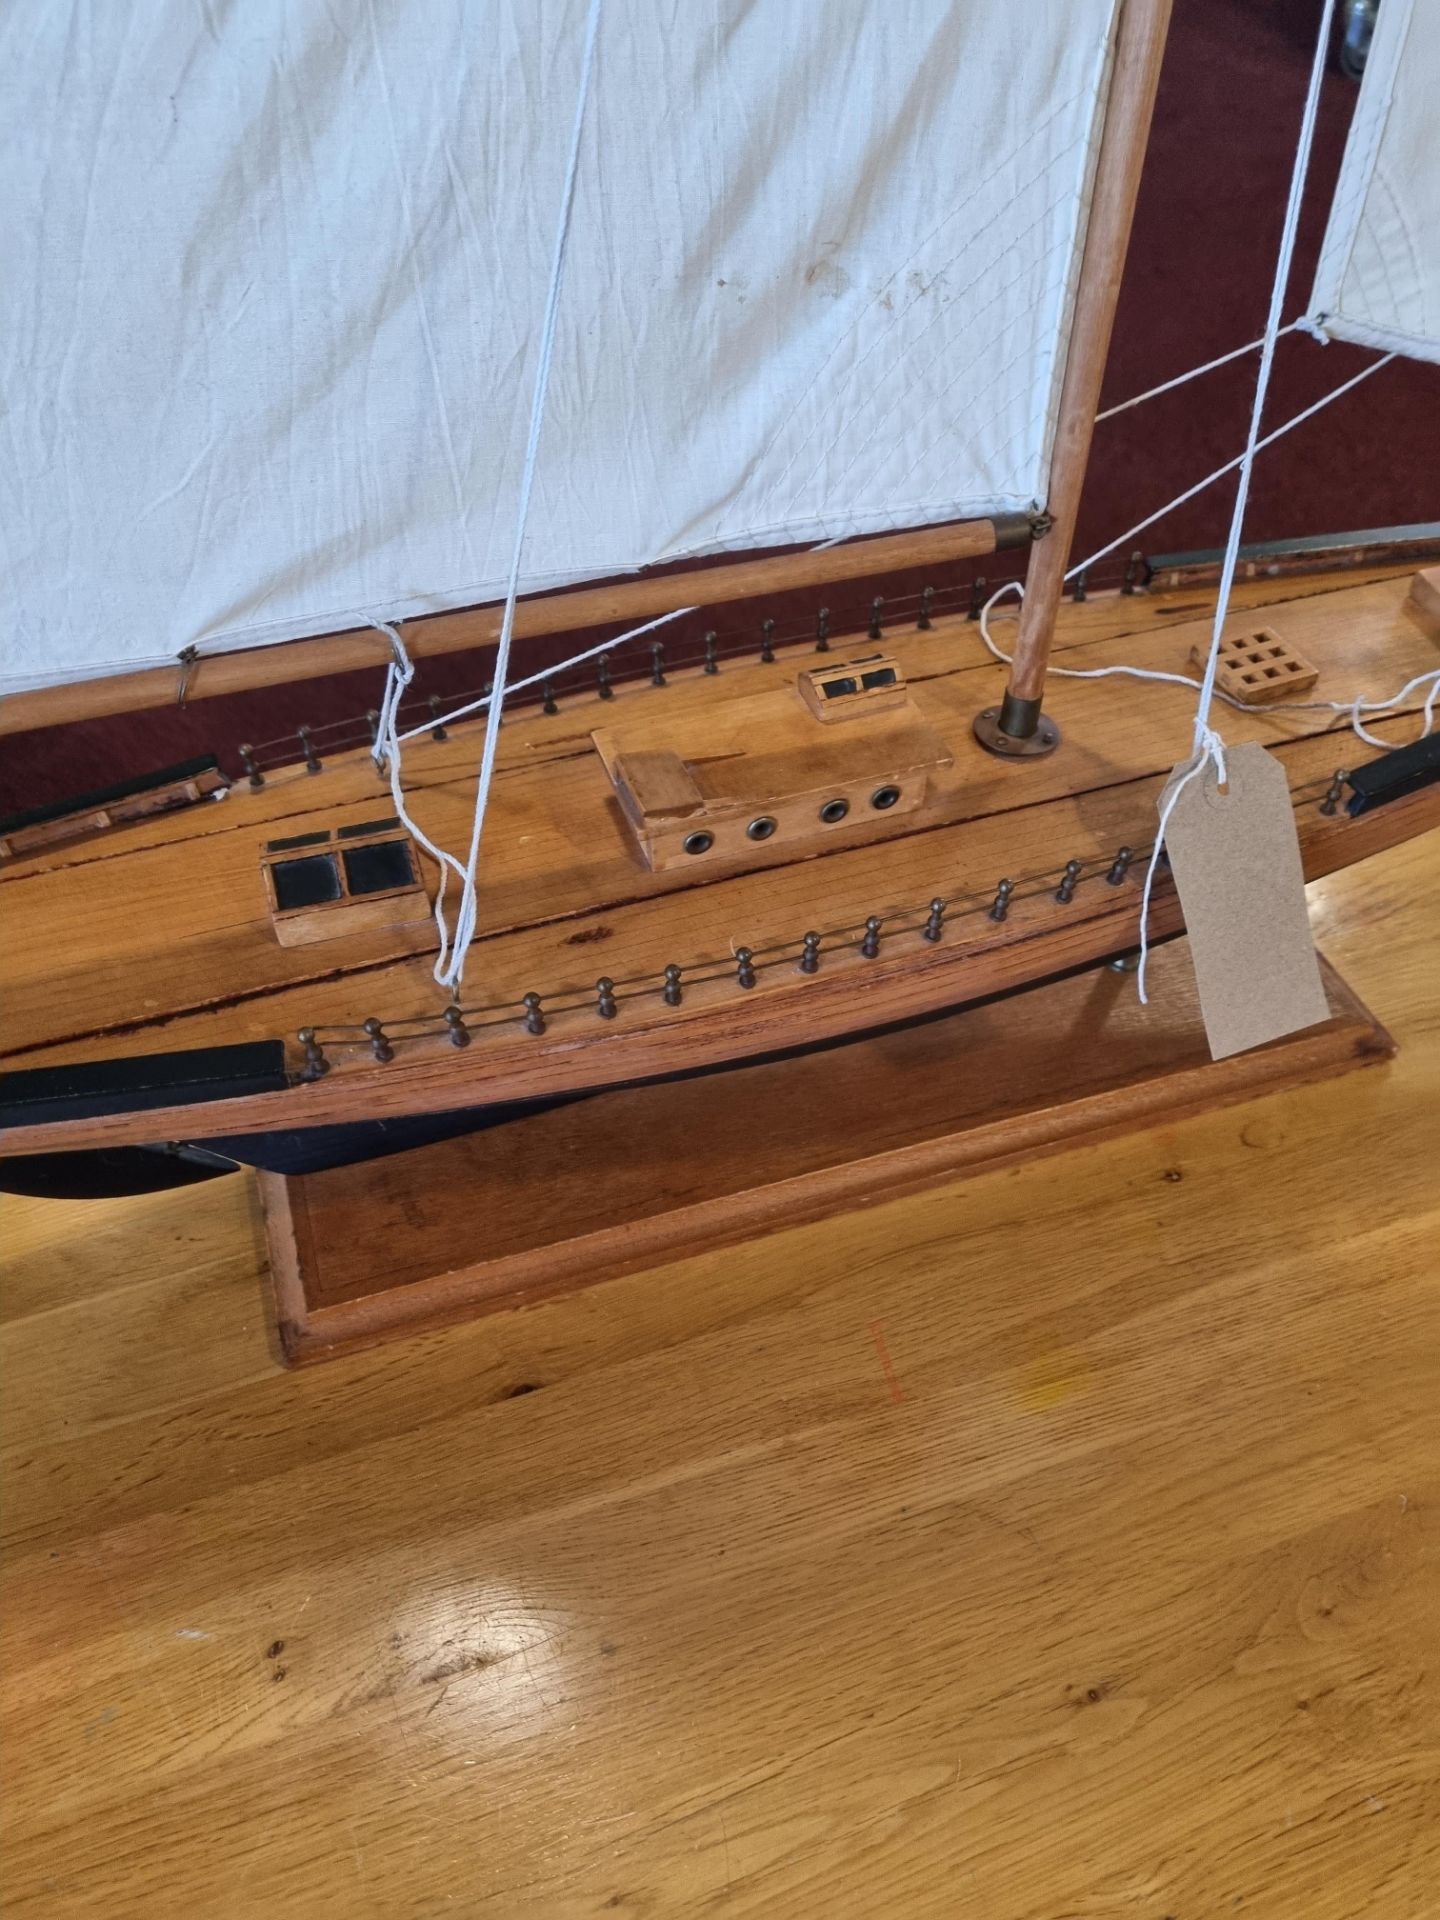 Wooden Model Of A Sailing Boat W 1100mm D 160mm H 1100mm - Image 6 of 7